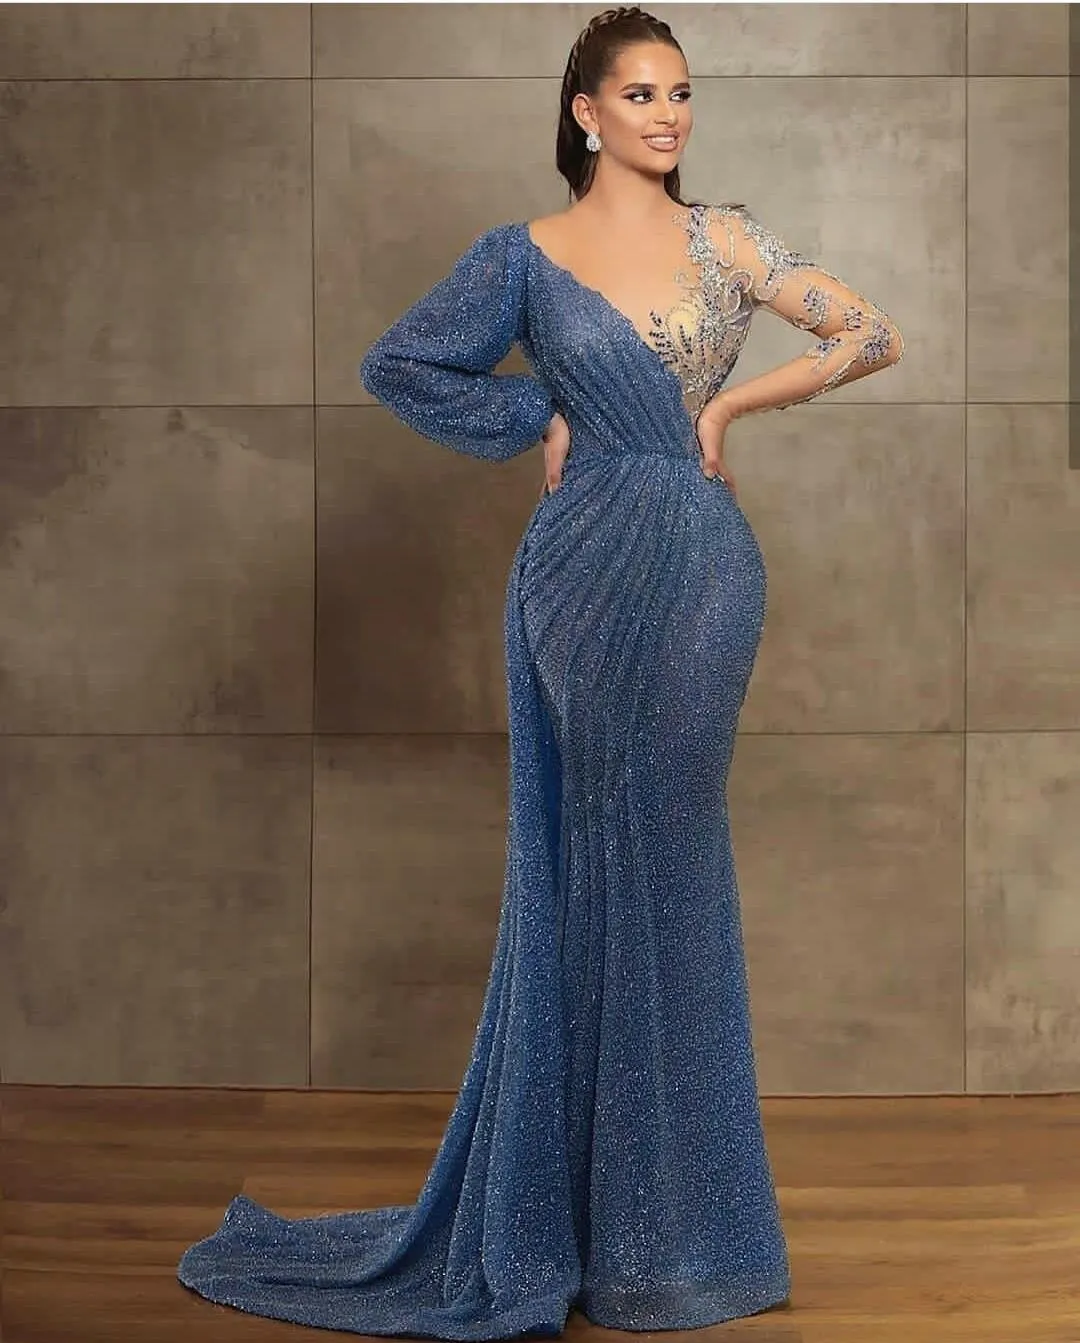 THE LIBAS COLLECTION PARTY WEAR LATEST GOWN FOR WOMEN